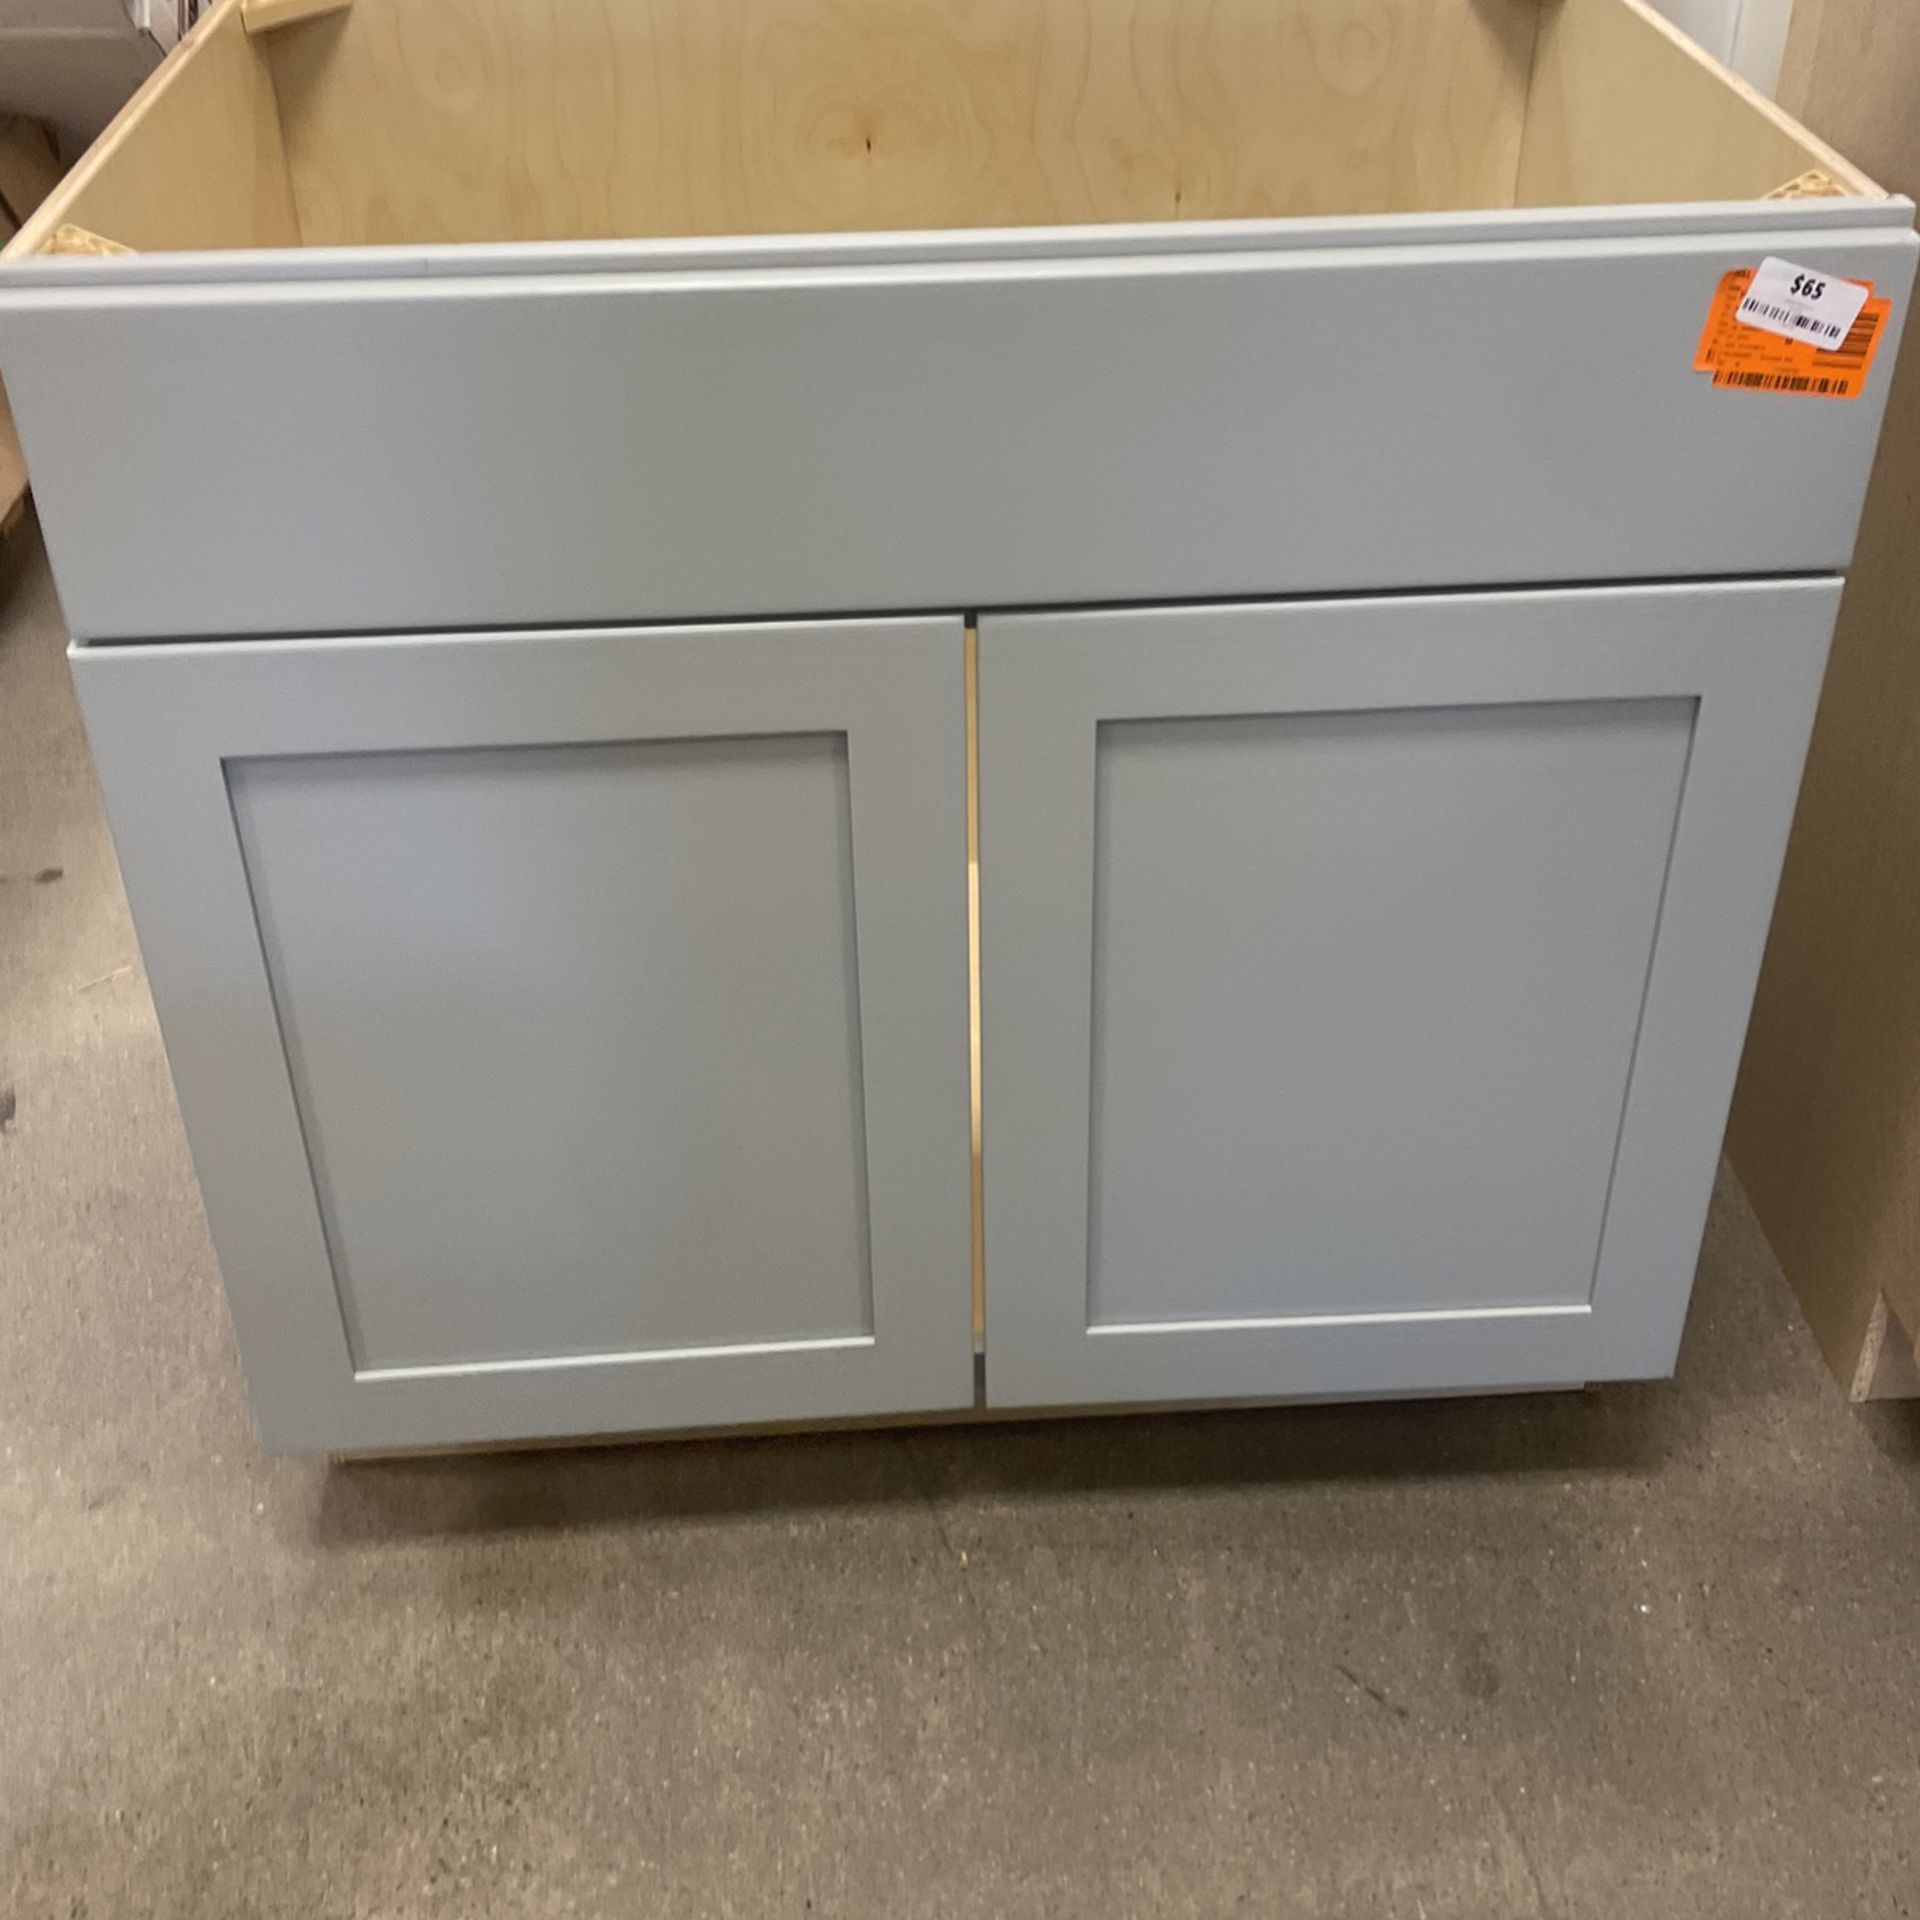 Hampton Bay Avondale Shaker Dove Gray Ready to Assemble Plywood 36 in Sink Base Cabinet (36 in W x 24 in D x 34.5 in H)